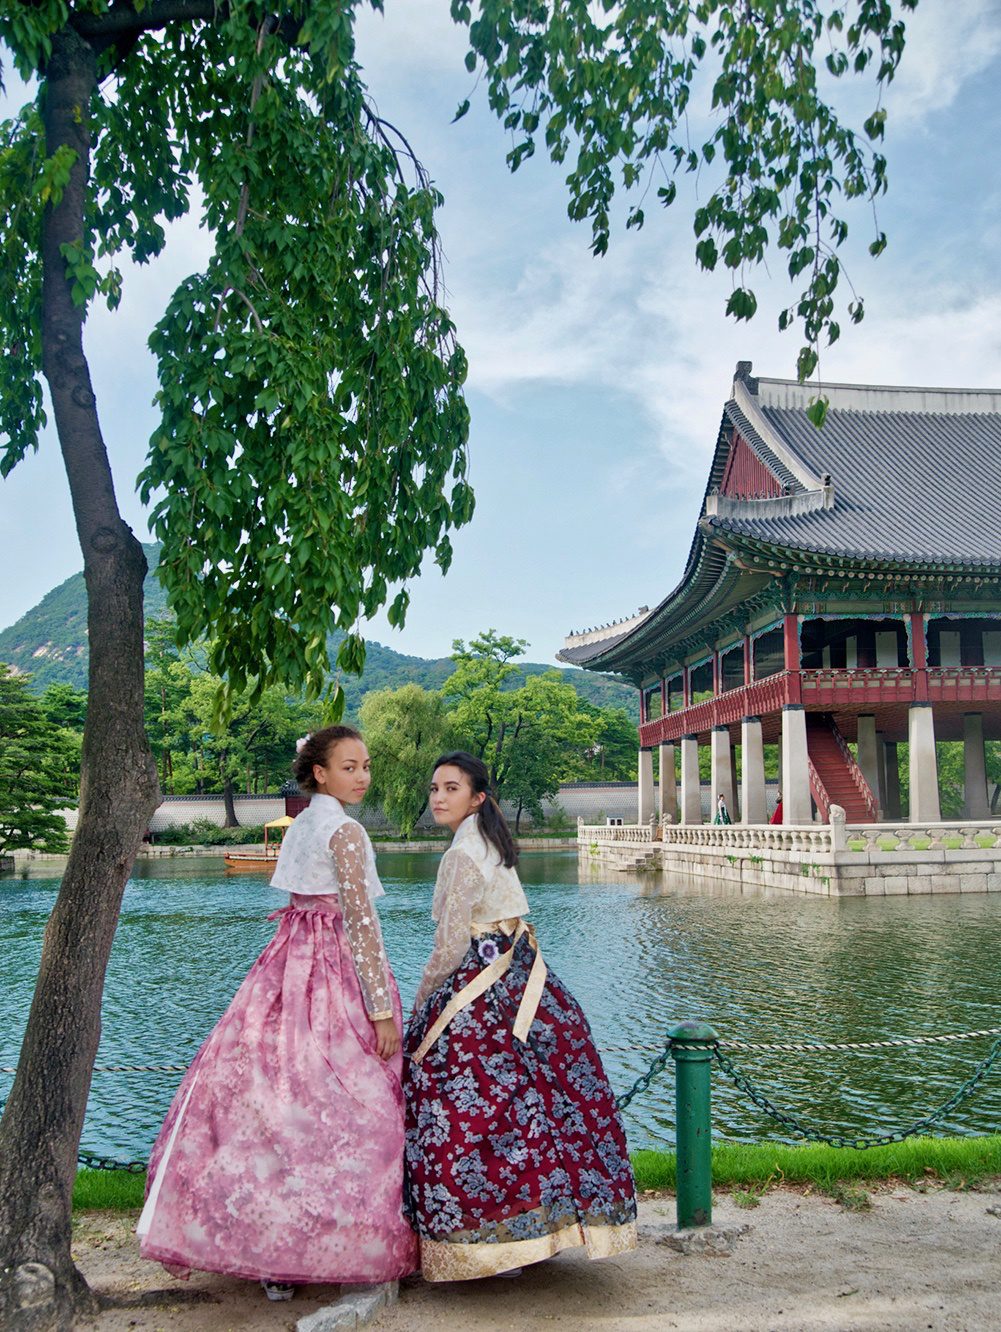 Hanbok dress in Seoul, South Korea. Family travel expert tips and multicultural education resources and books from a woman traveling the world with her kids and active duty military husband.